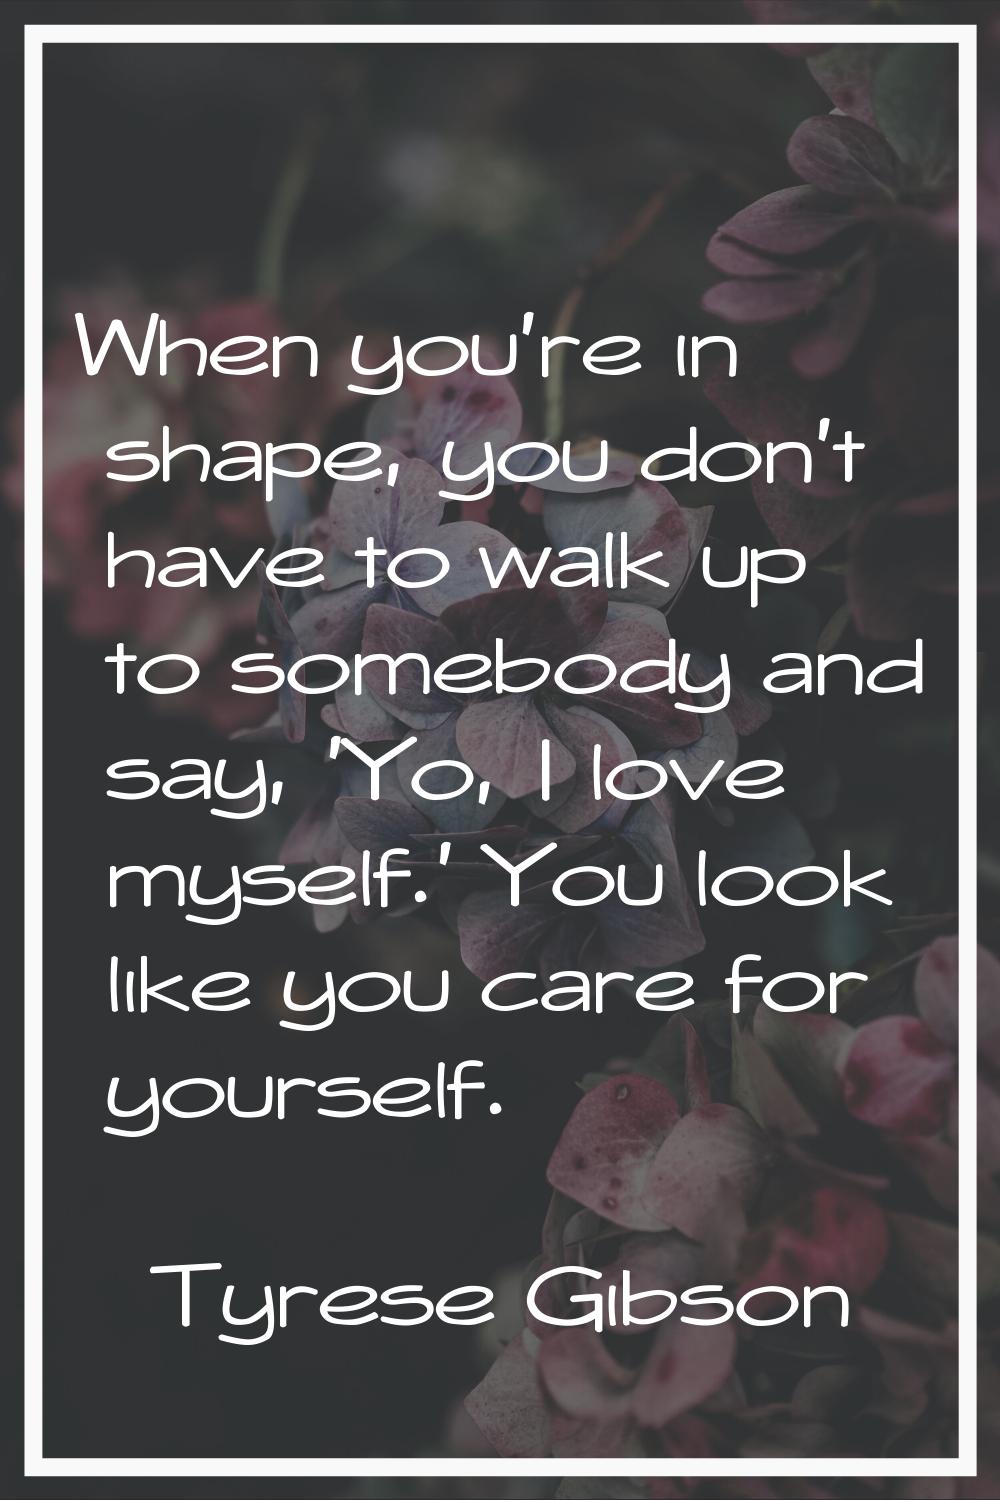 When you're in shape, you don't have to walk up to somebody and say, 'Yo, I love myself.' You look 